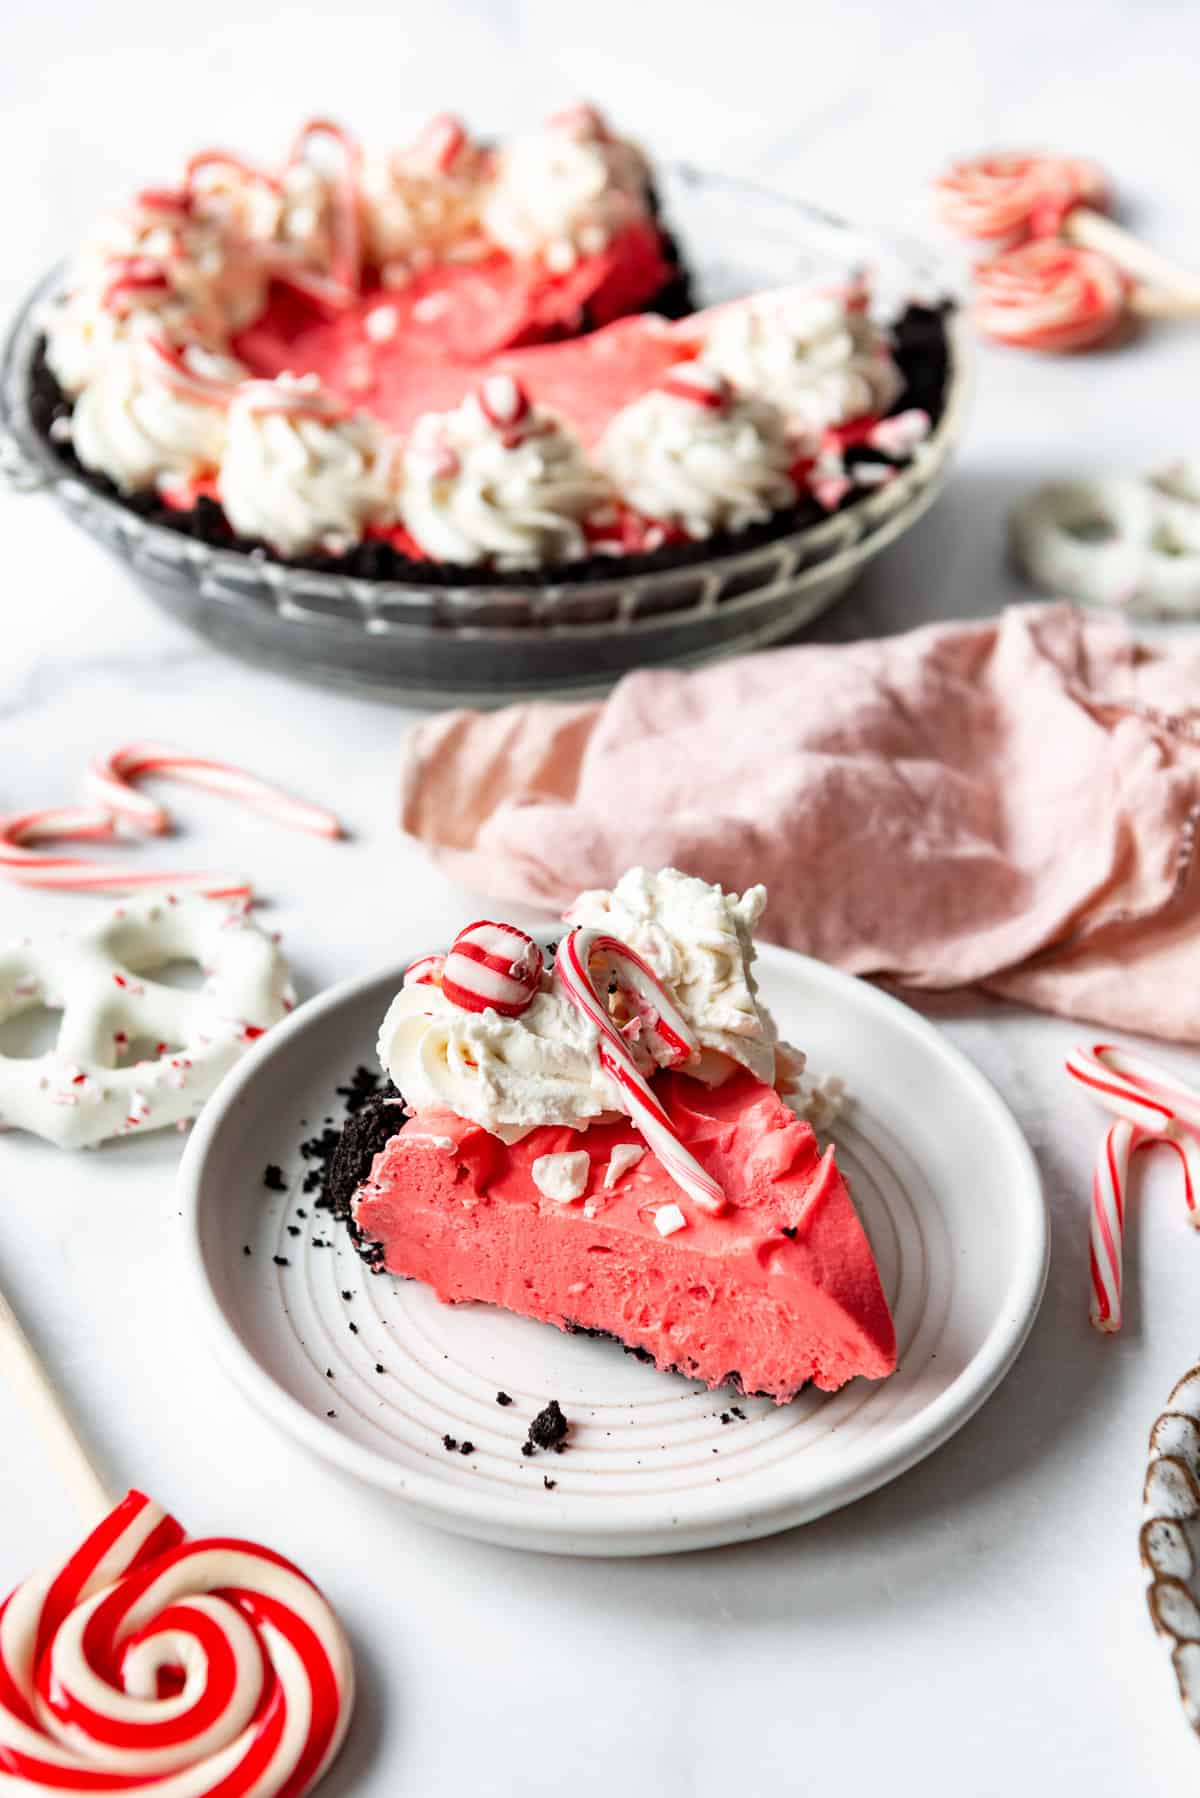 A slice of peppermint pie on a white plate in front of the whole pie.